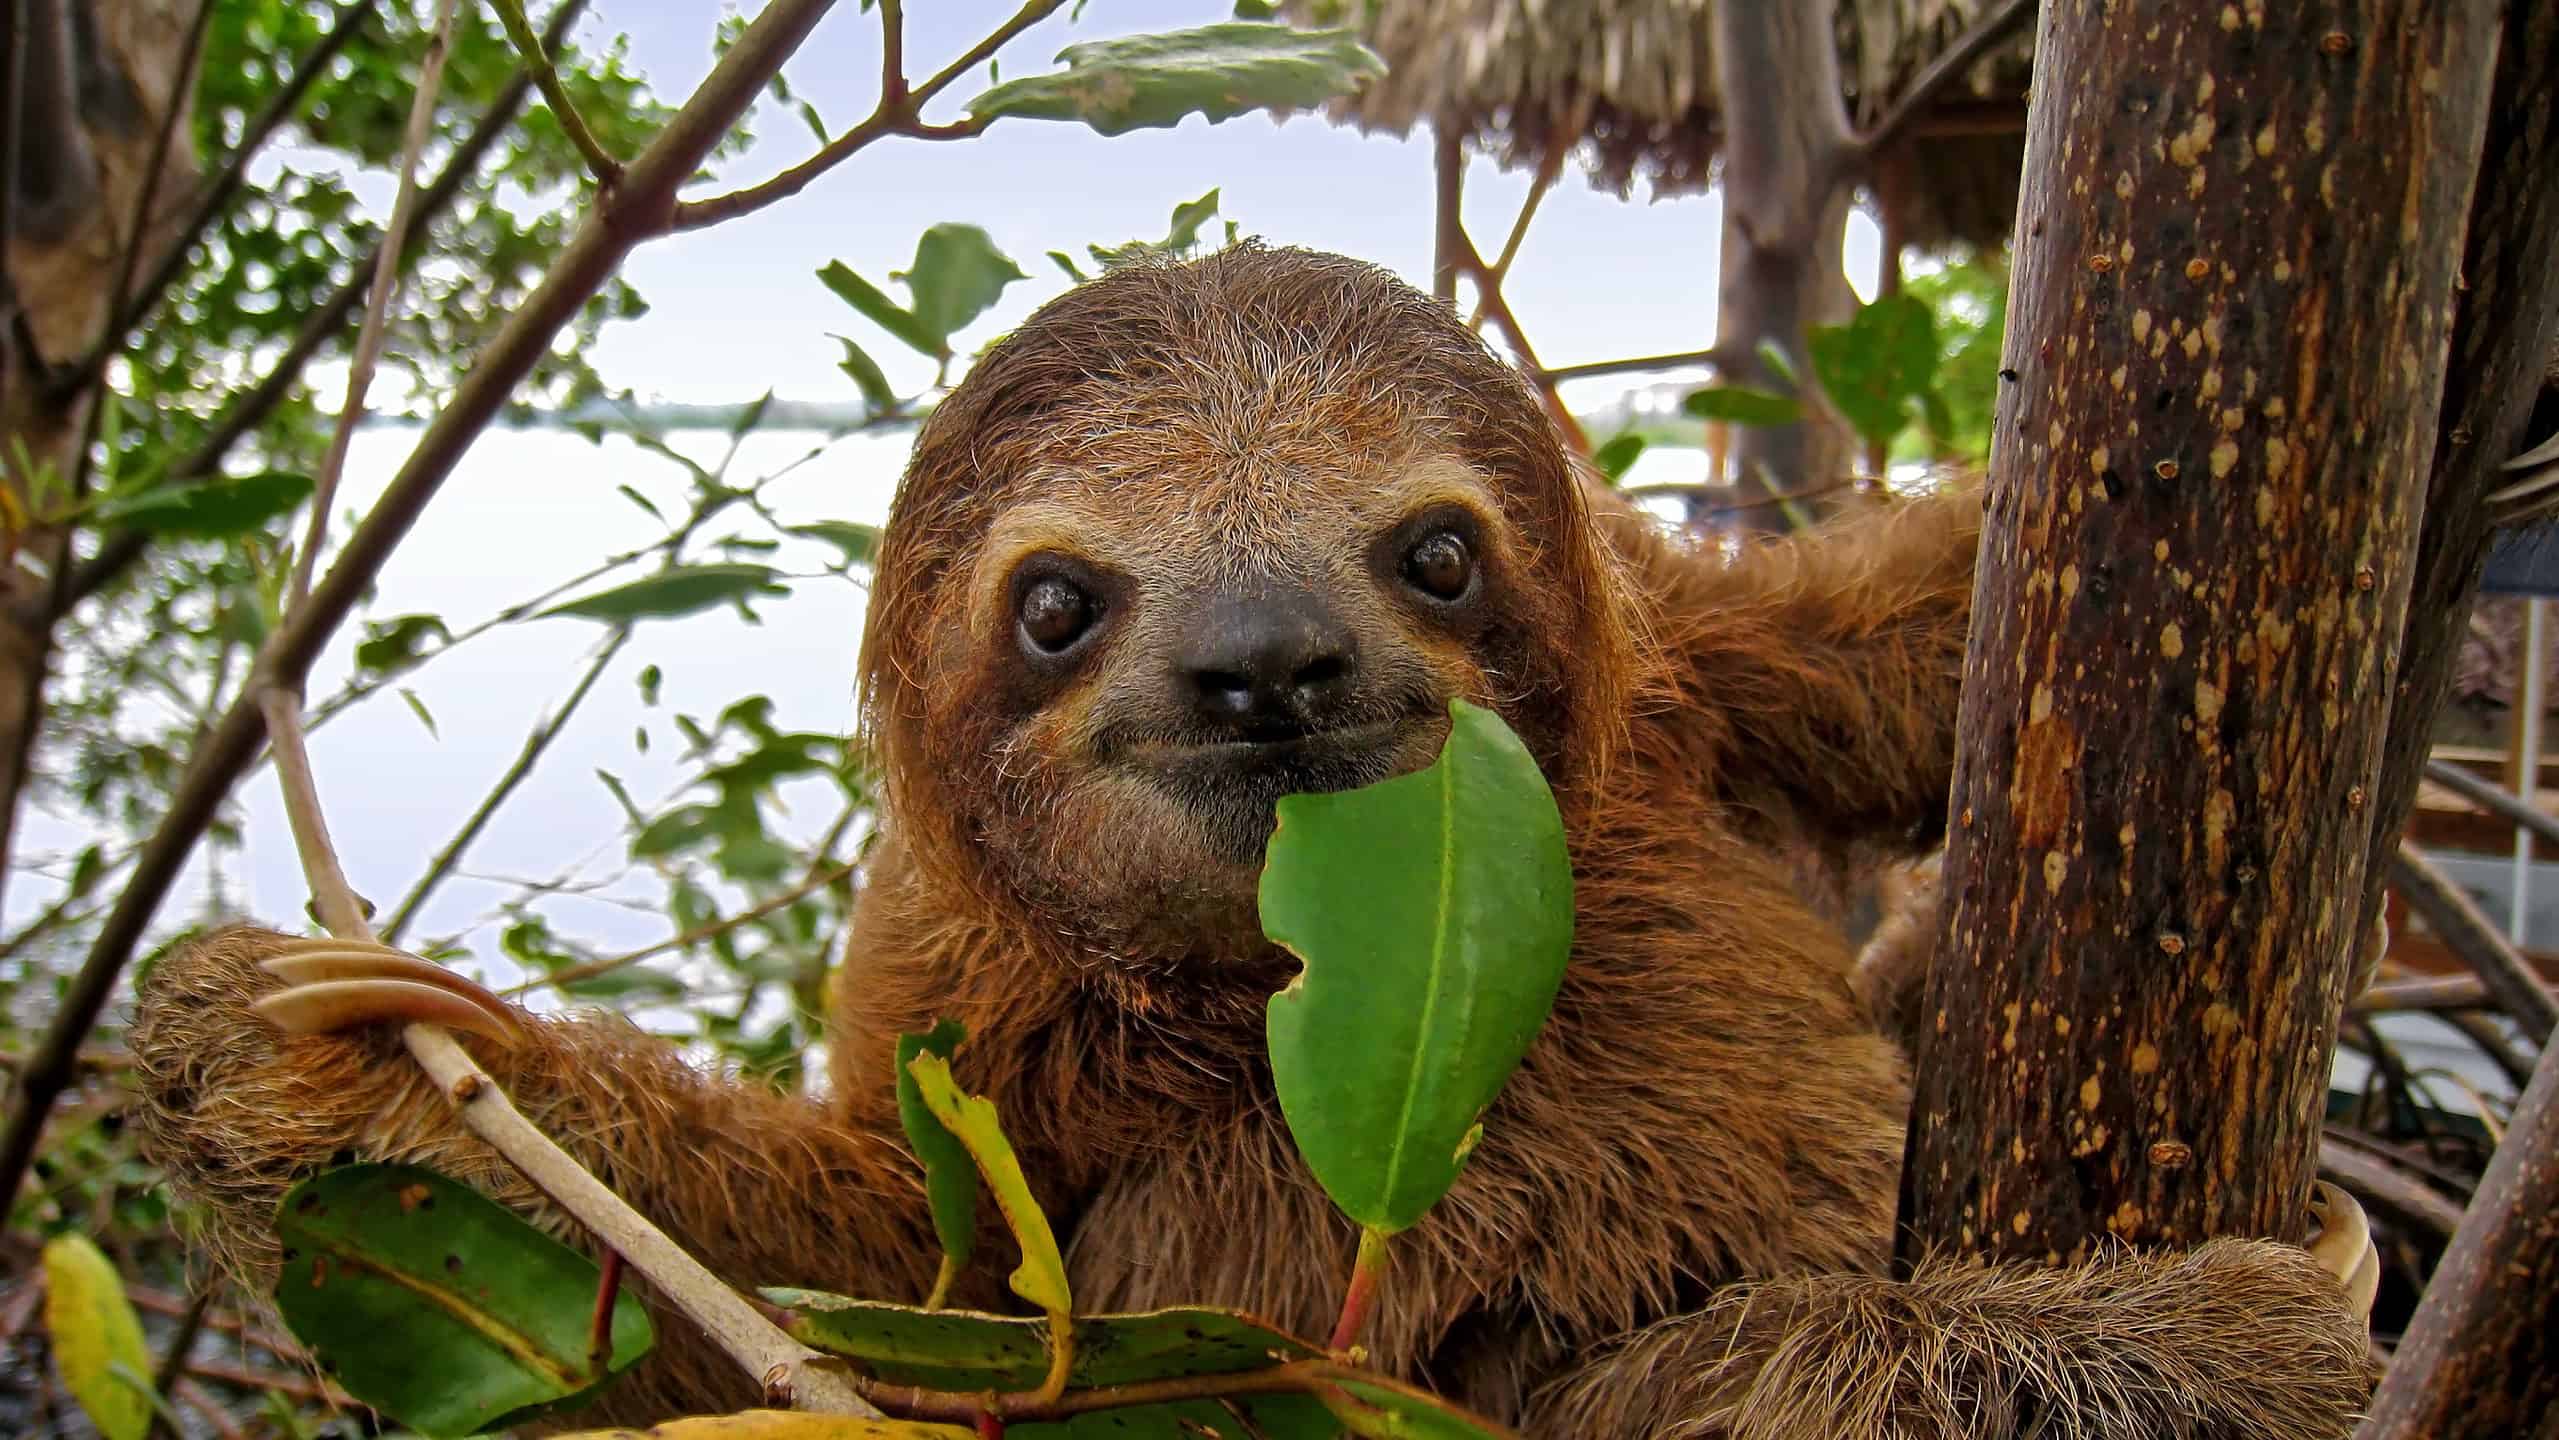 Baby Brown throated Three toed sloth in the mangrove, Caribbean, Costa Rica